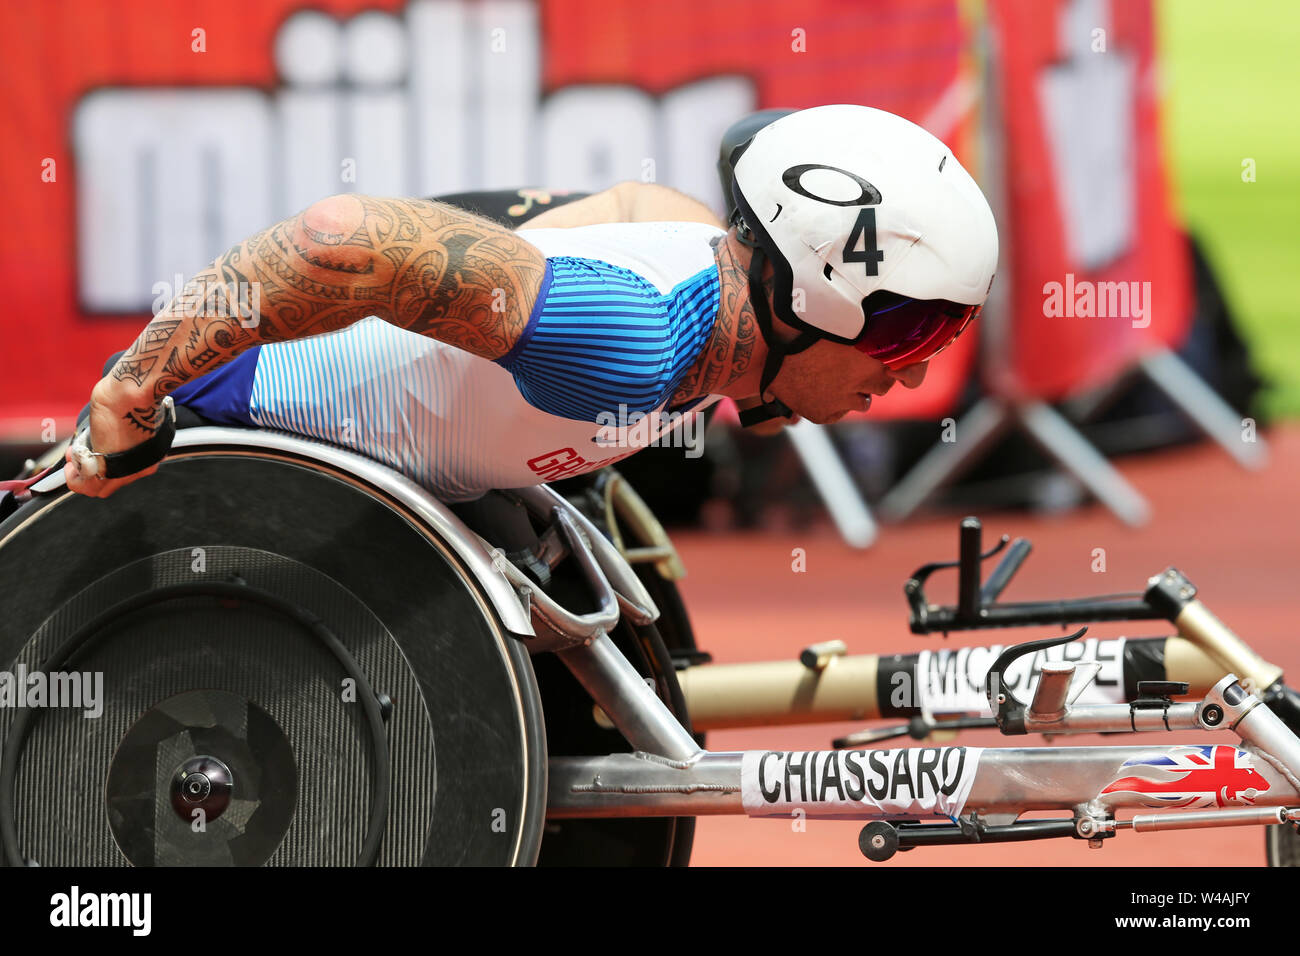 London, UK. 21st July 19. Richard CHIASSARO (Great Britain) competing in the Men's T53/54 800m Final at the 2019, IAAF Diamond League, Anniversary Games, Queen Elizabeth Olympic Park, Stratford, London, UK. Credit: Simon Balson/Alamy Live News Stock Photo